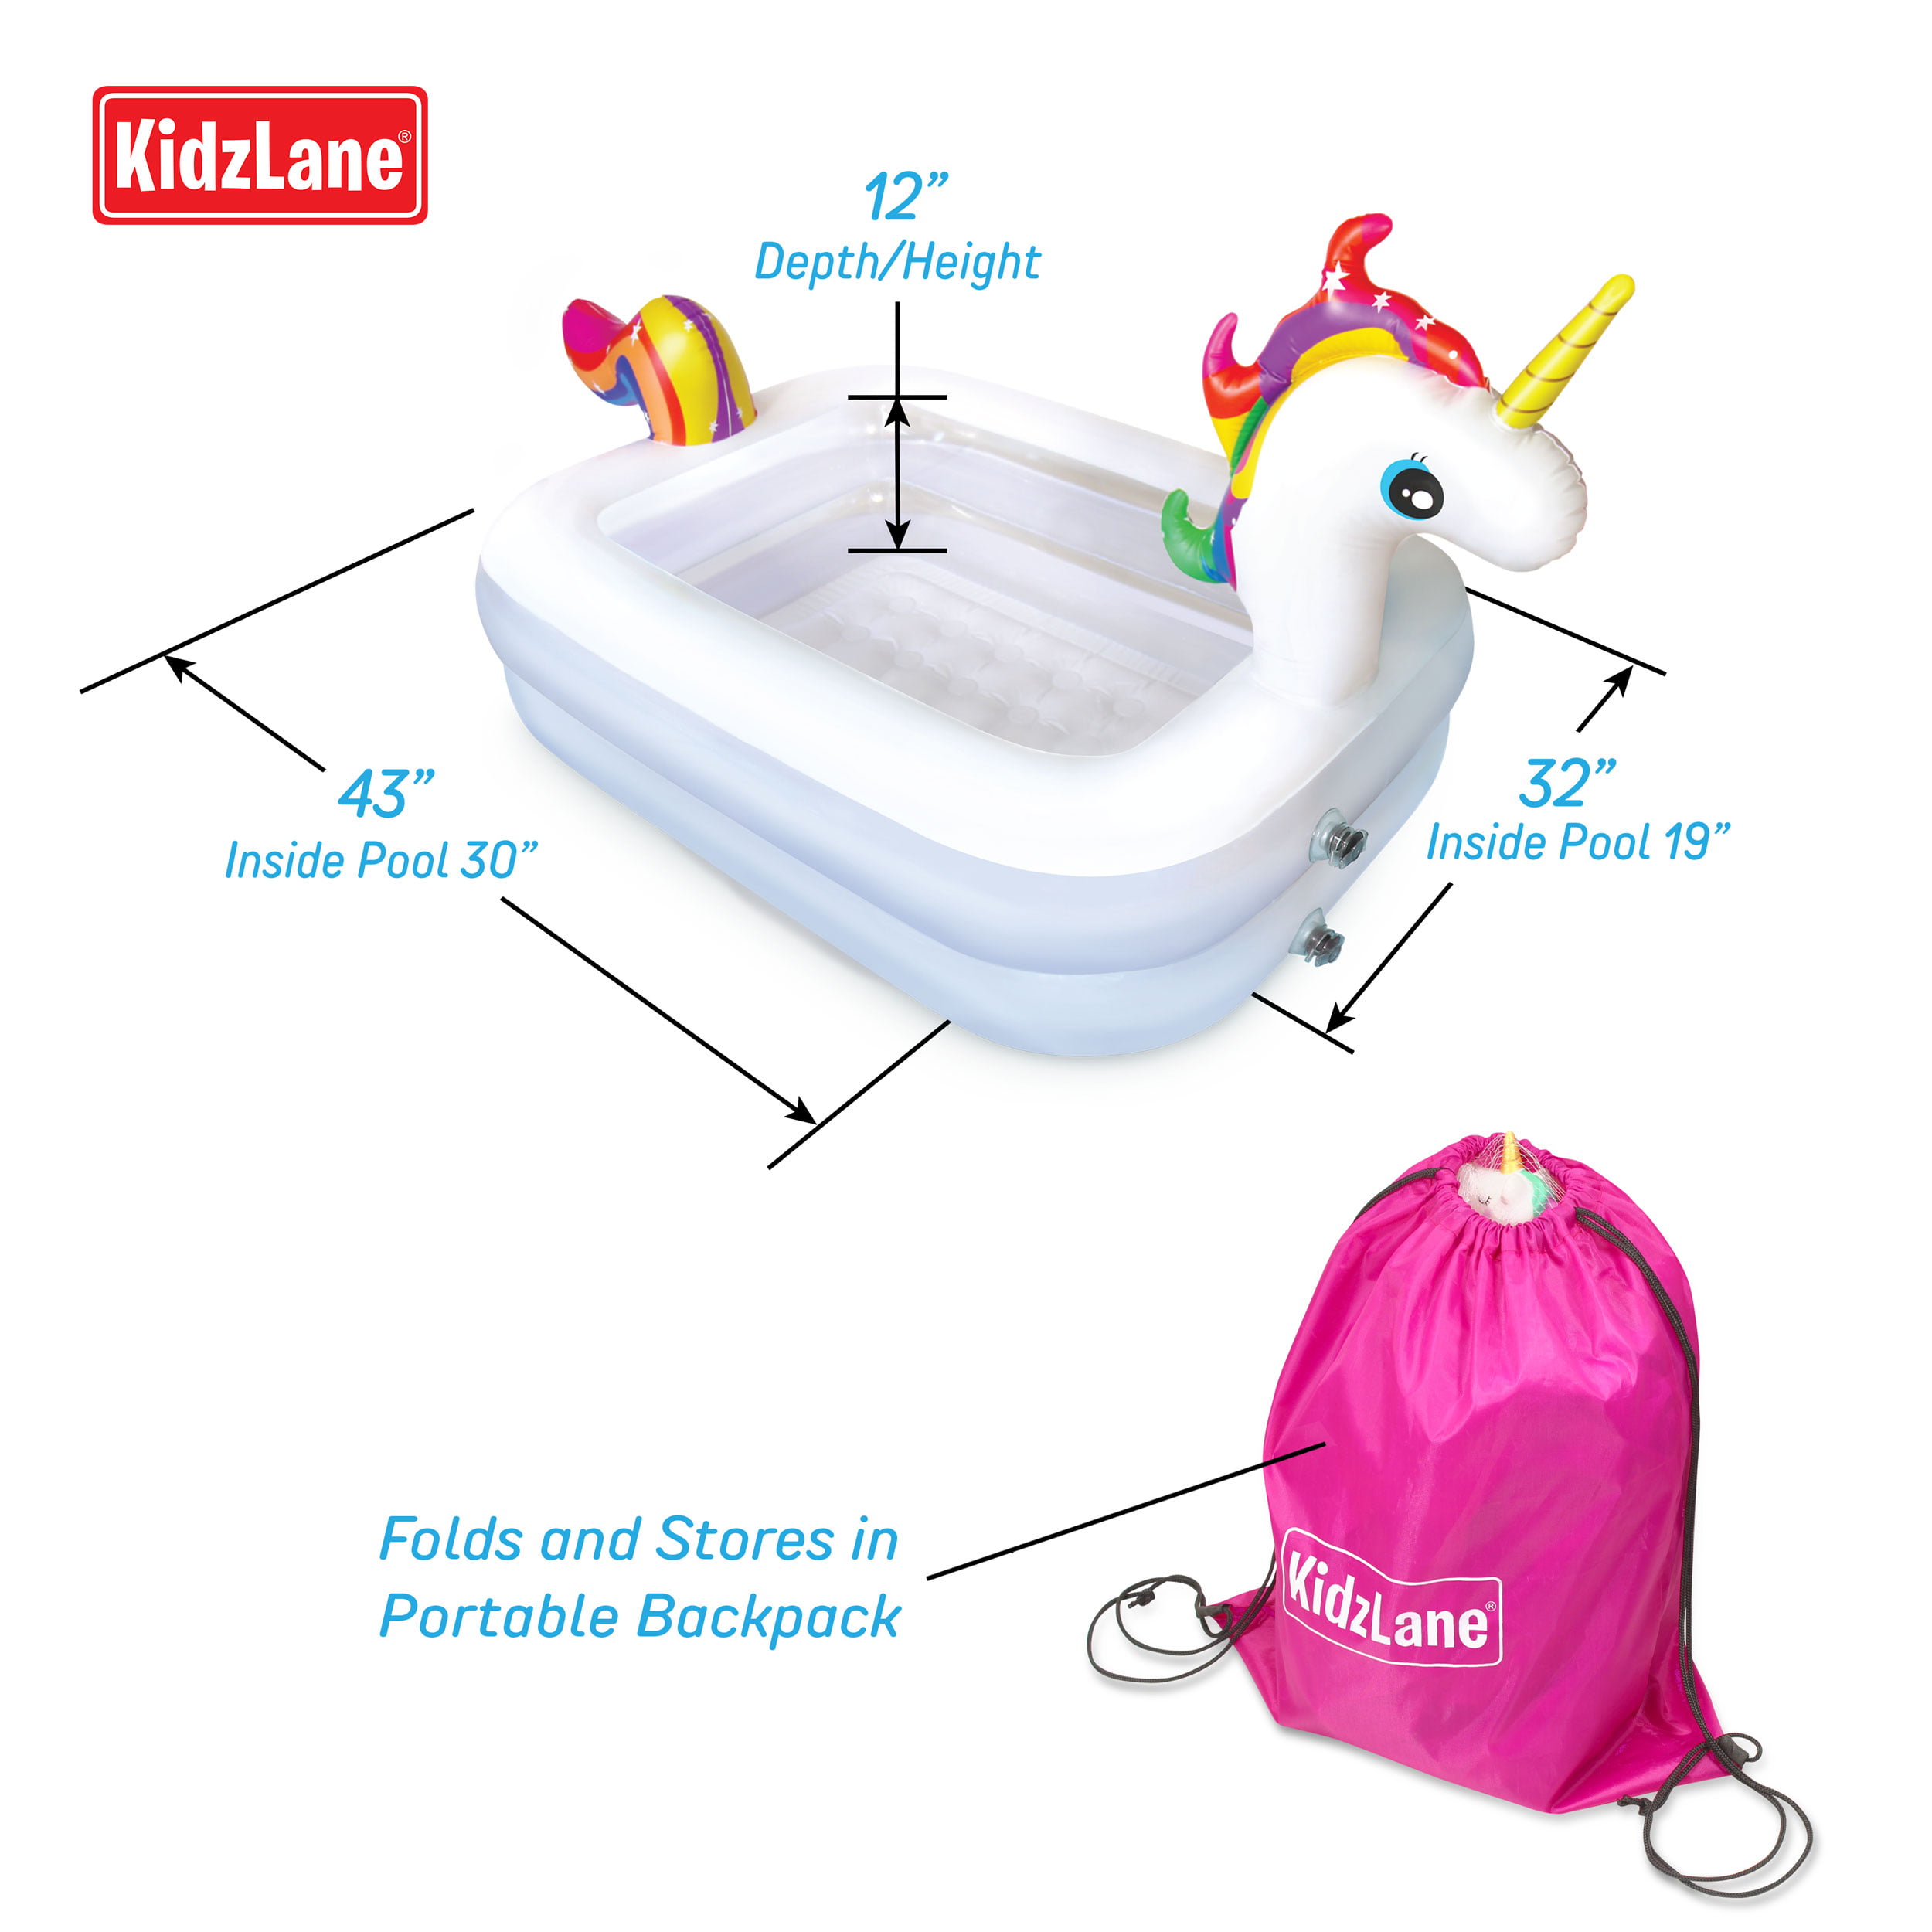 Carrying Bag Kidzlane Unicorn Pool for Kids with Unicorn Pool Toys Pump 43” x 32” x 28 Toddler Blow Up Swimming Pool for Backyard & Outdoor Small Inflatable Kiddie Pool Includes Pool Toys 